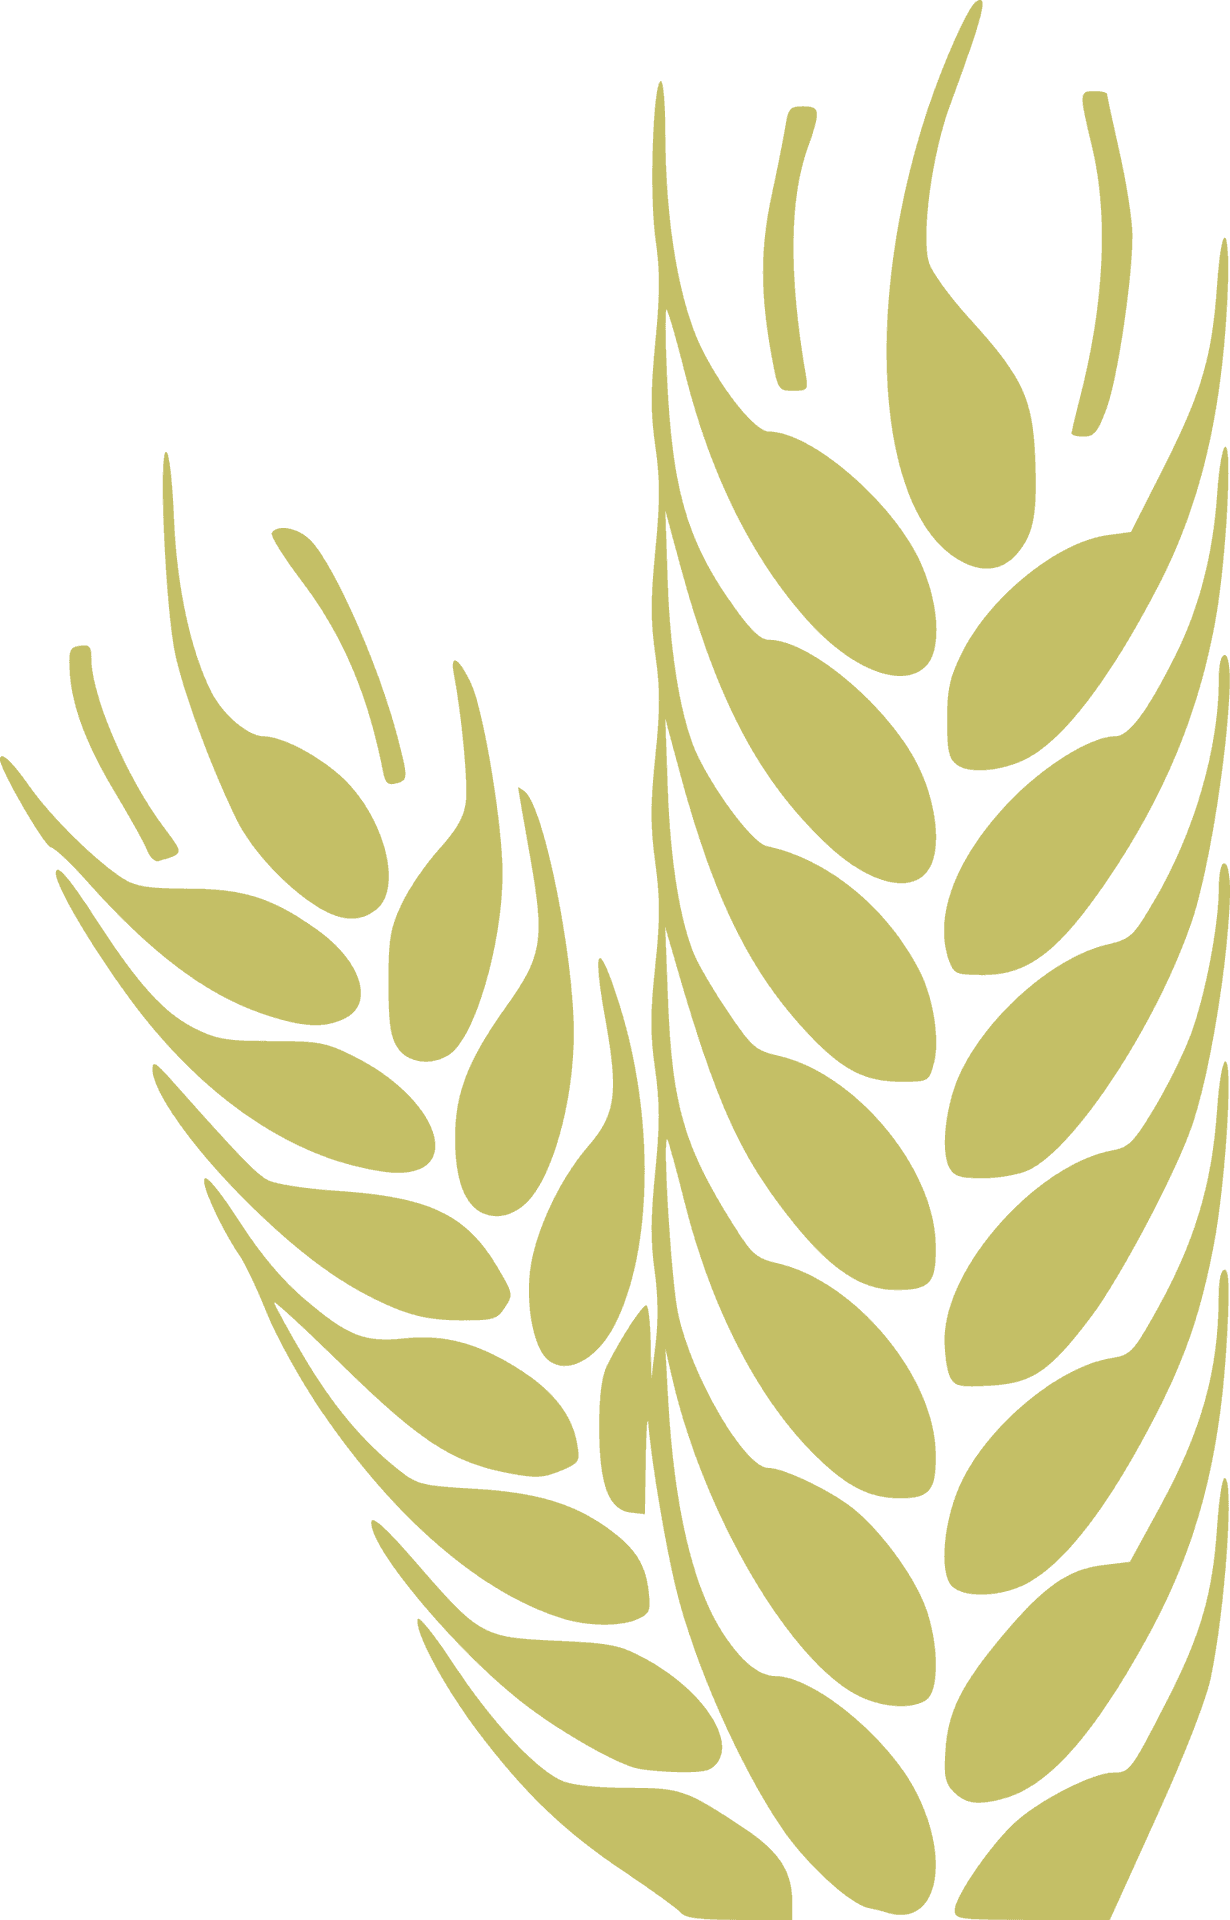 Golden Wheat Ears Graphic PNG image